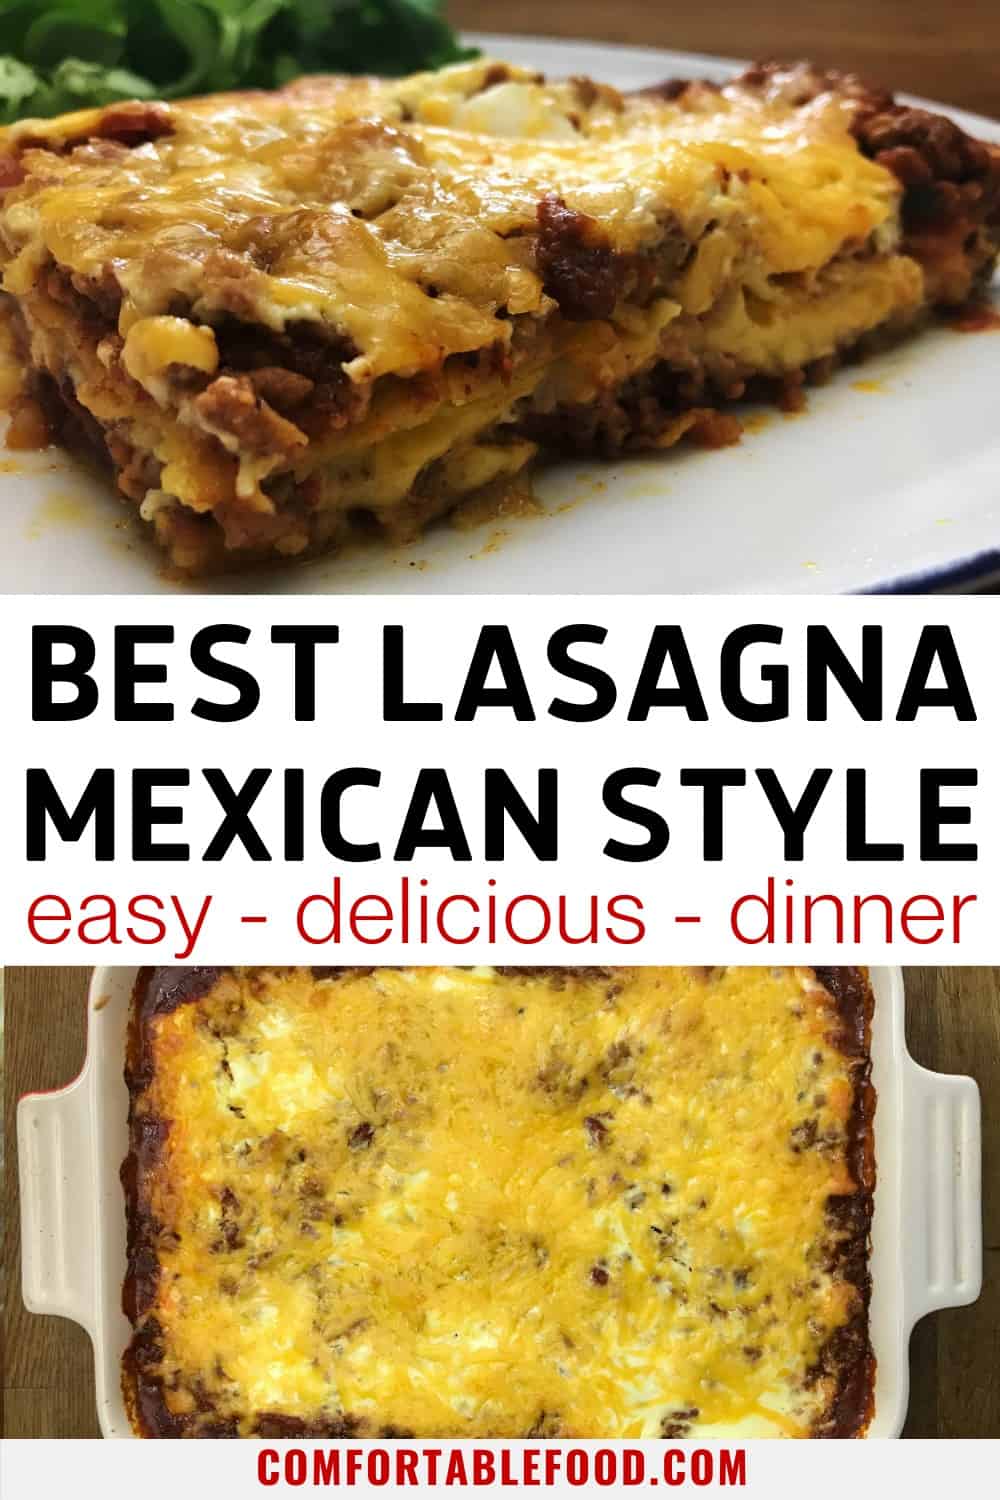 Mexican lasagna loaded with a succulent meat mixture, layered with crispy corn tortillas, and smothered with shredded cheddar cheese